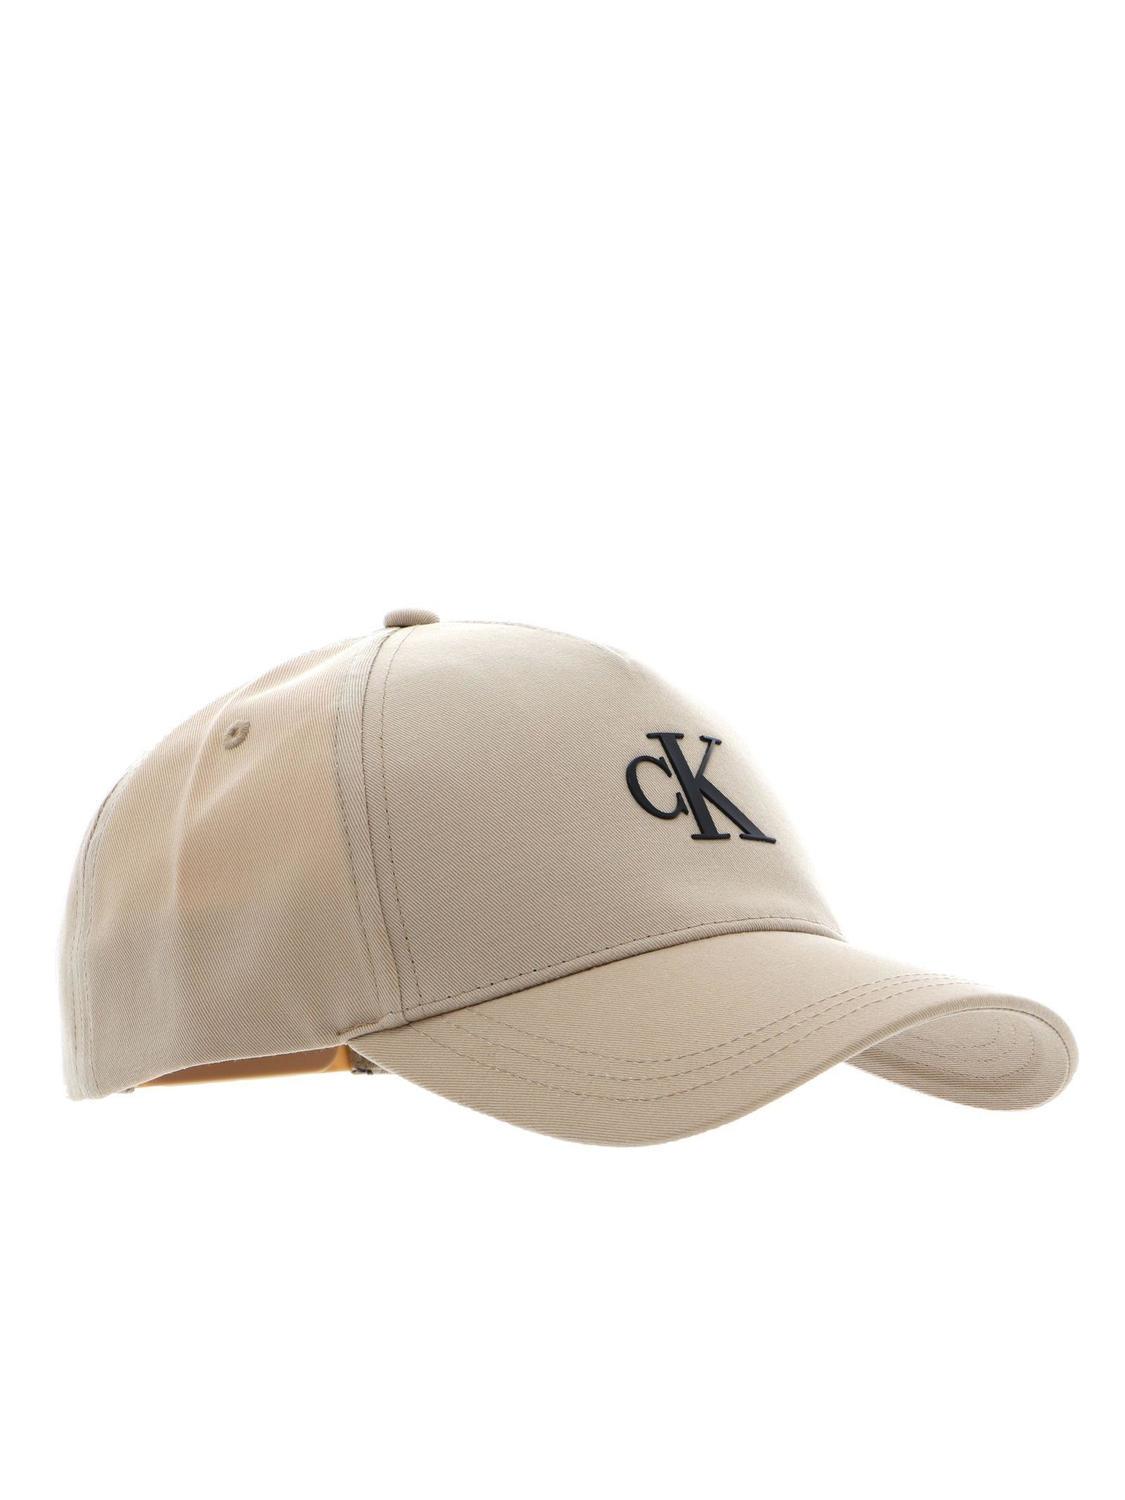 Calvin Klein Ck Jeans Archive Baseball Hat Travertine - Buy At Outlet  Prices!